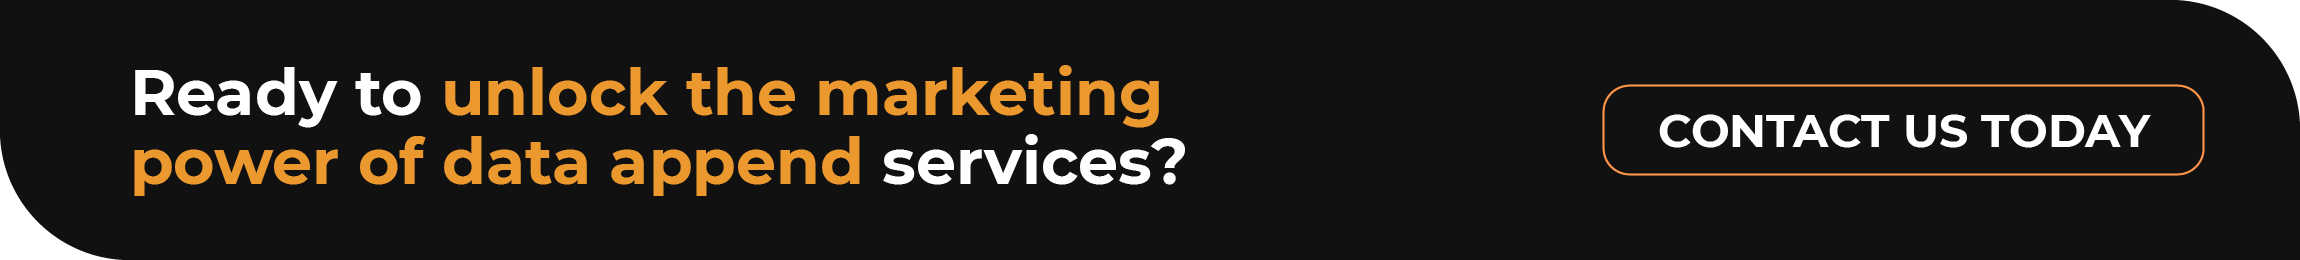 Contact us today to learn more about how our data append services can boost your marketing efforts.